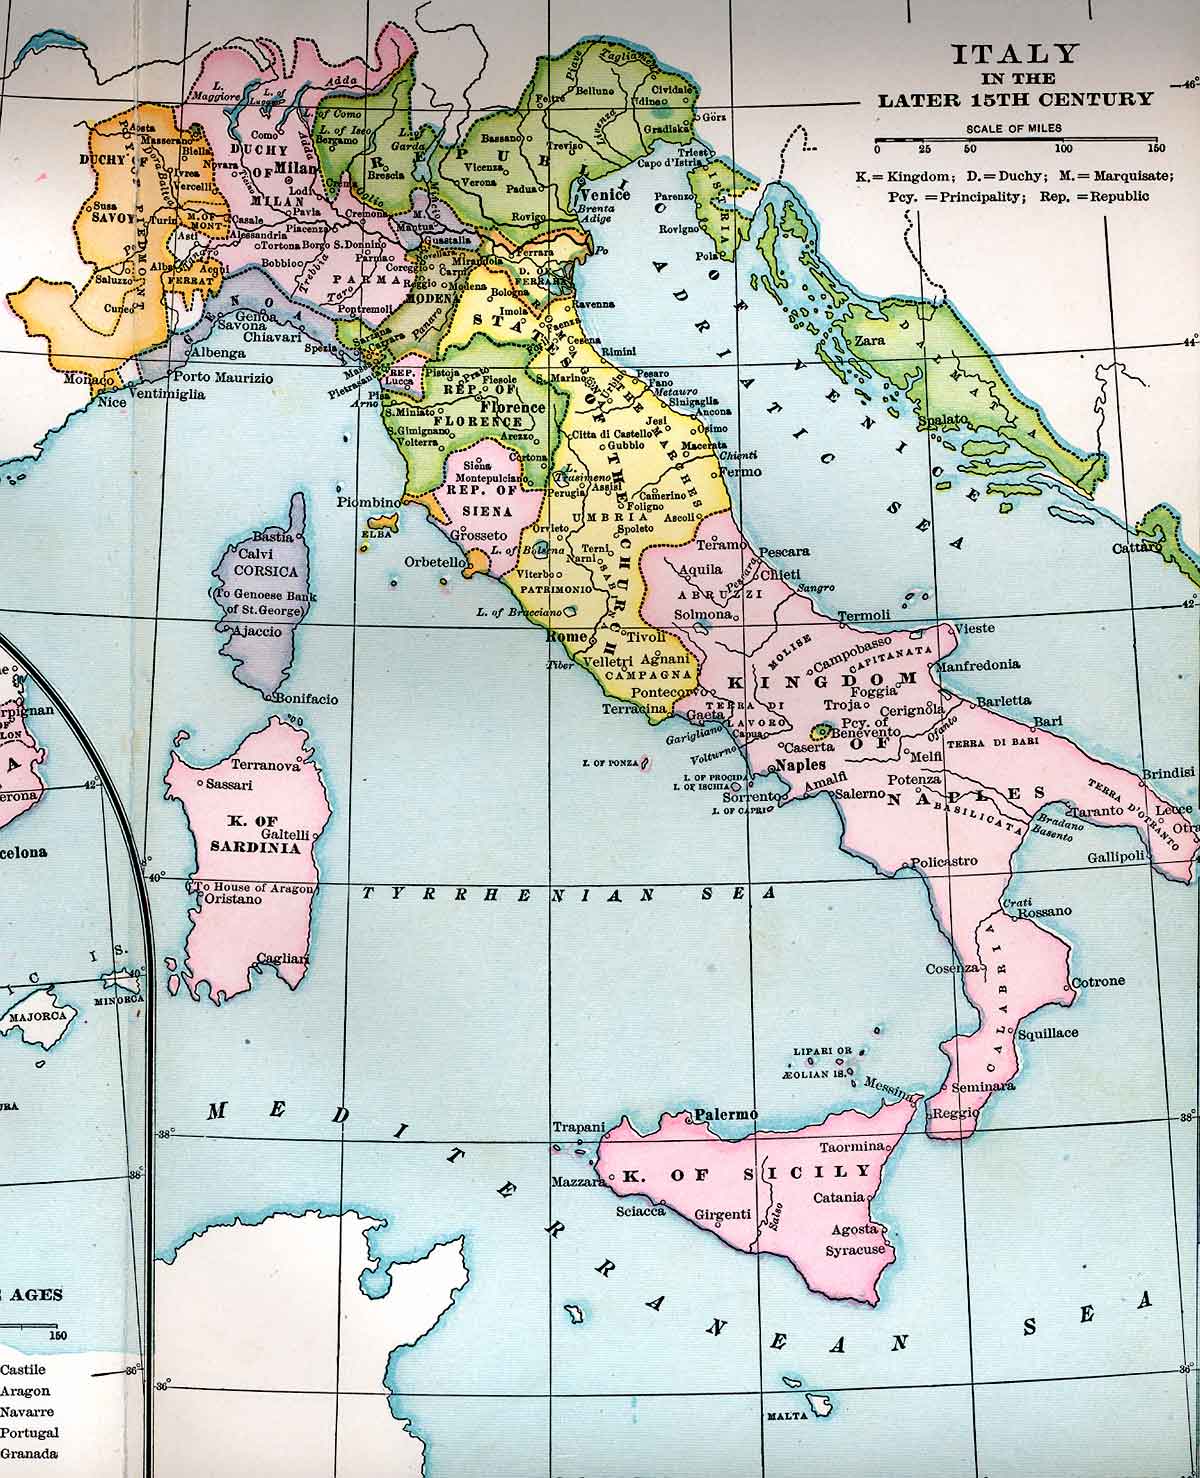 Italy in the Later Fifteenth Century